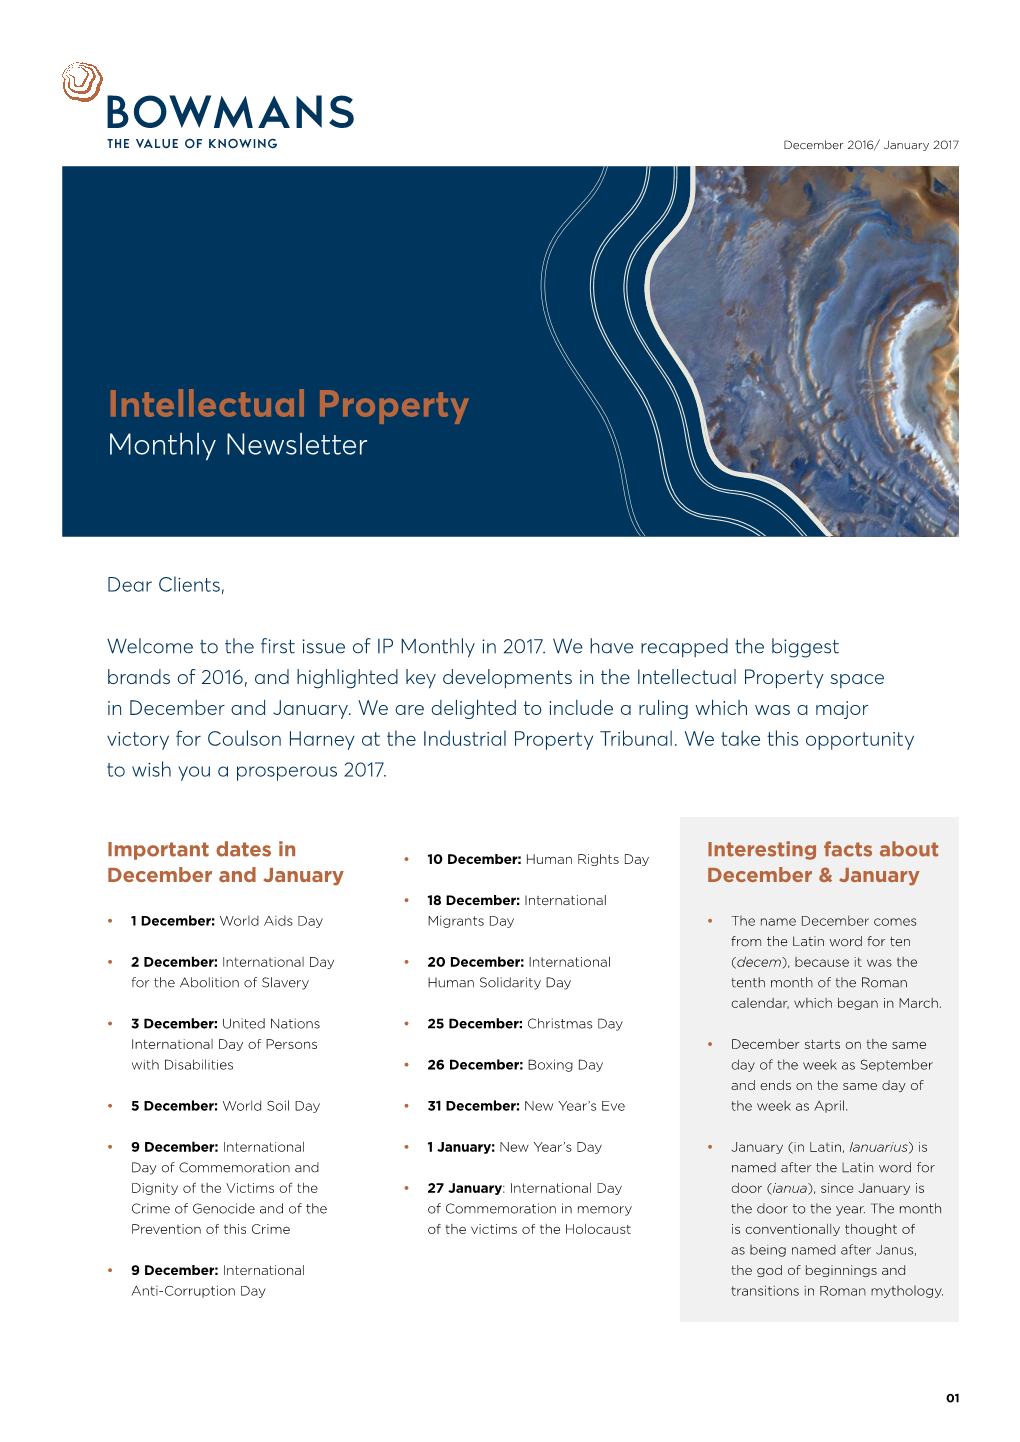 Intellectual Property Monthly Newsletter